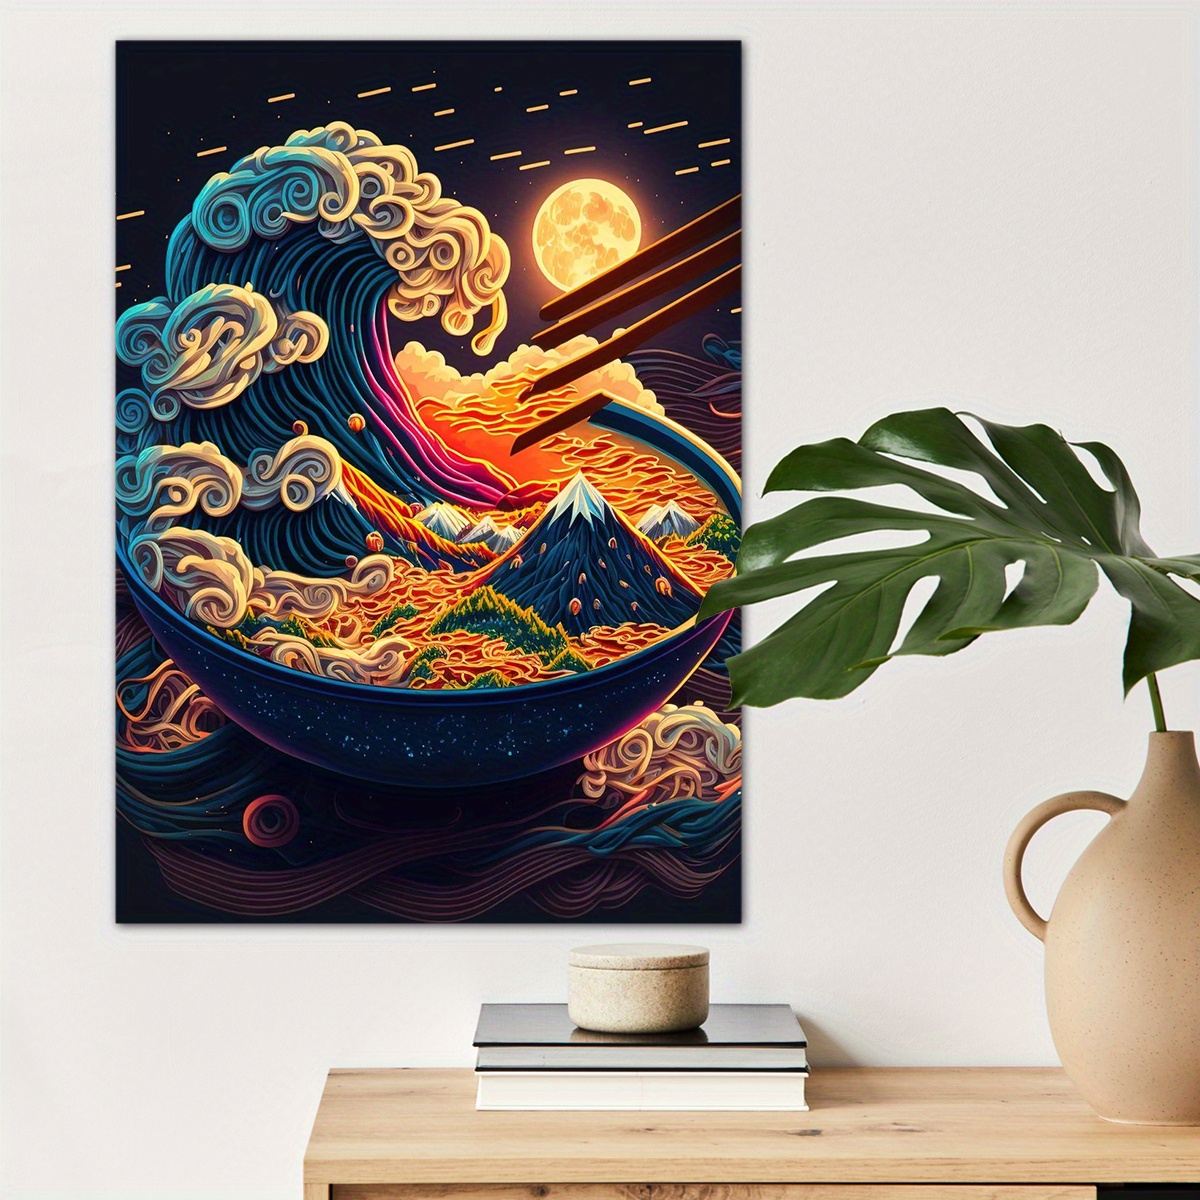 

1pc Noodles, Sushi, And Soup Themes Canvas Wall Art For Home Decor, High Quality Wall Decor, Canvas Prints For Living Room Bedroom Bathroom Kitchen Office Cafe Decor, Perfect Gift And Decoration